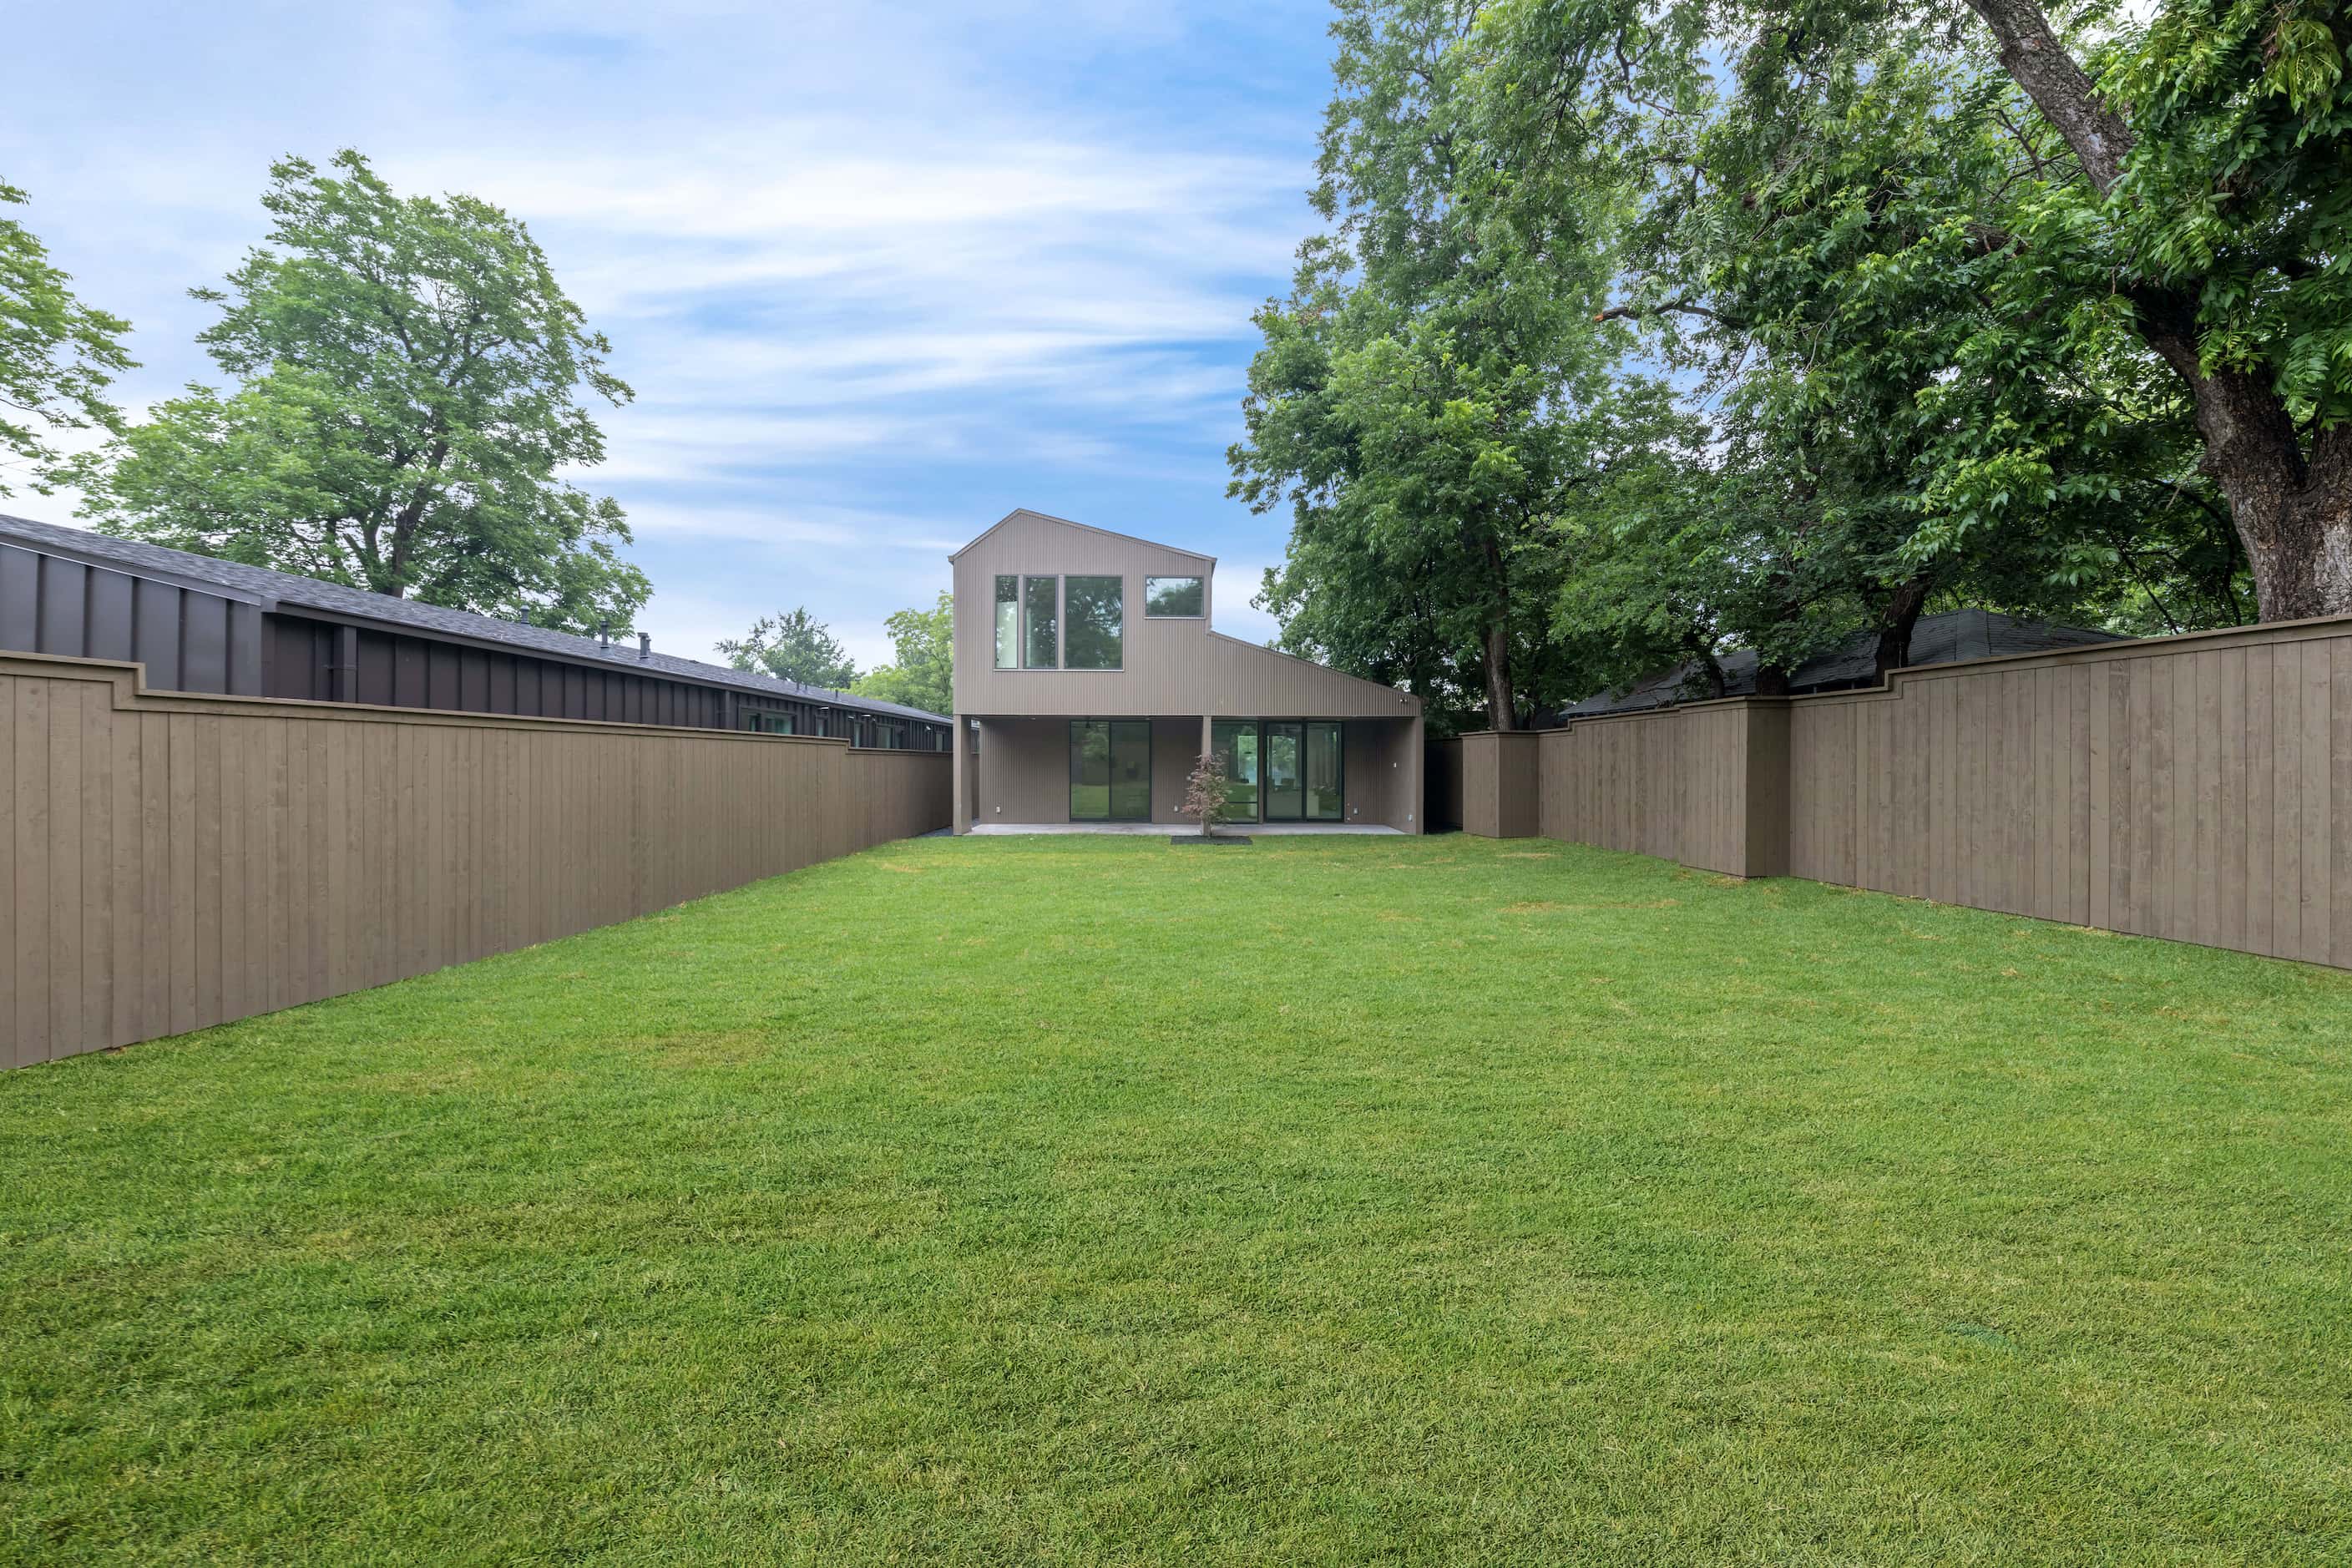 Exterior photo of contemporary home with metal exterior, large grassy area